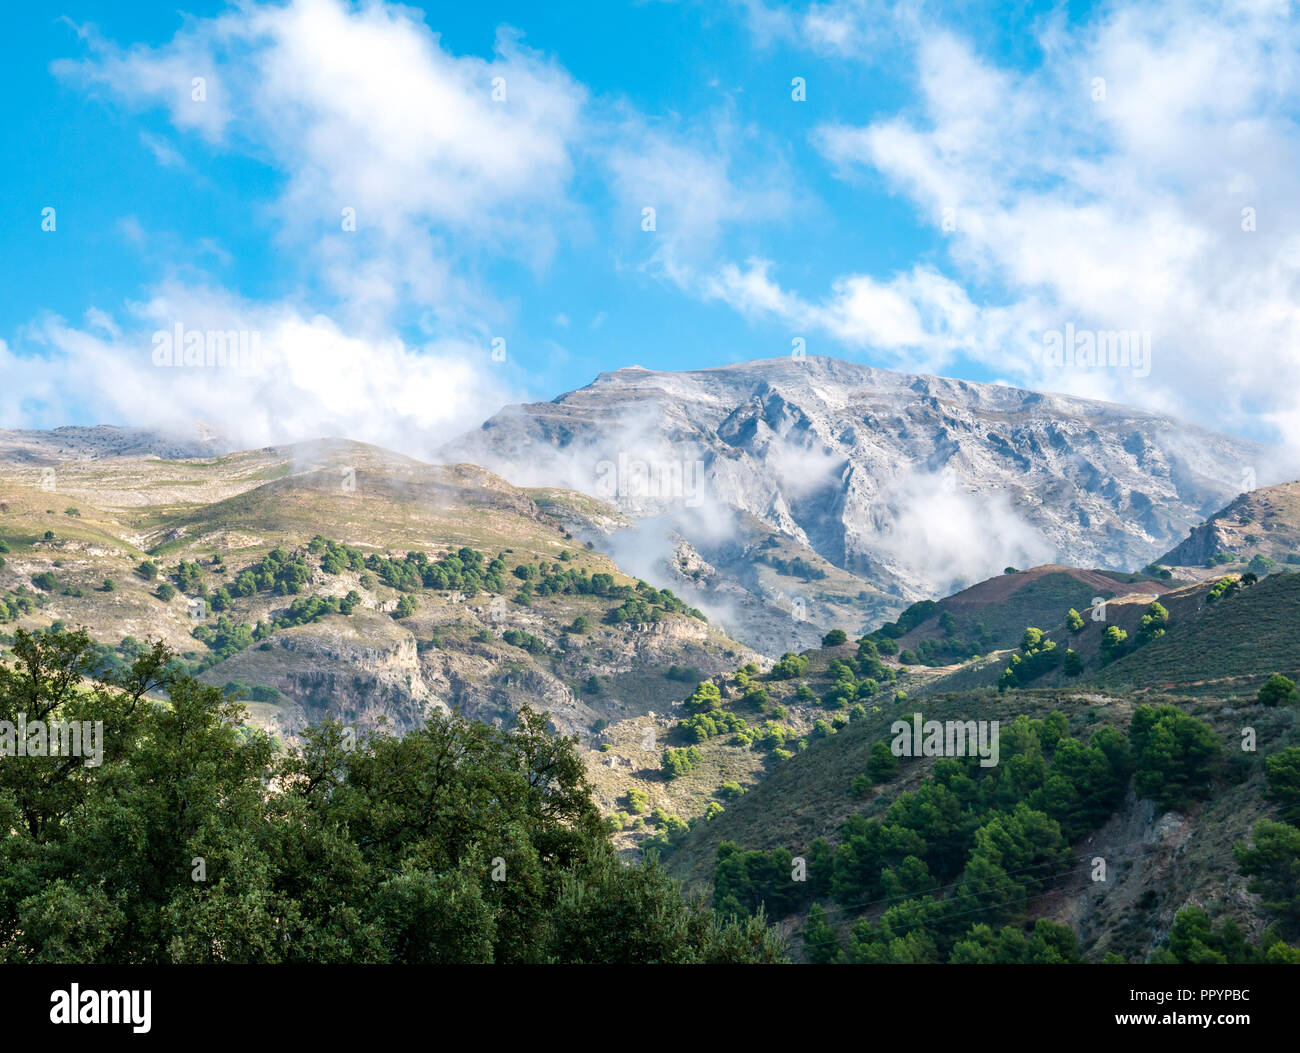 Mountain ridge covered in wispy clouds, Mudejar route, Sierras de Tejeda Natural Park, Axarquia, Andalusia, Spain Stock Photo